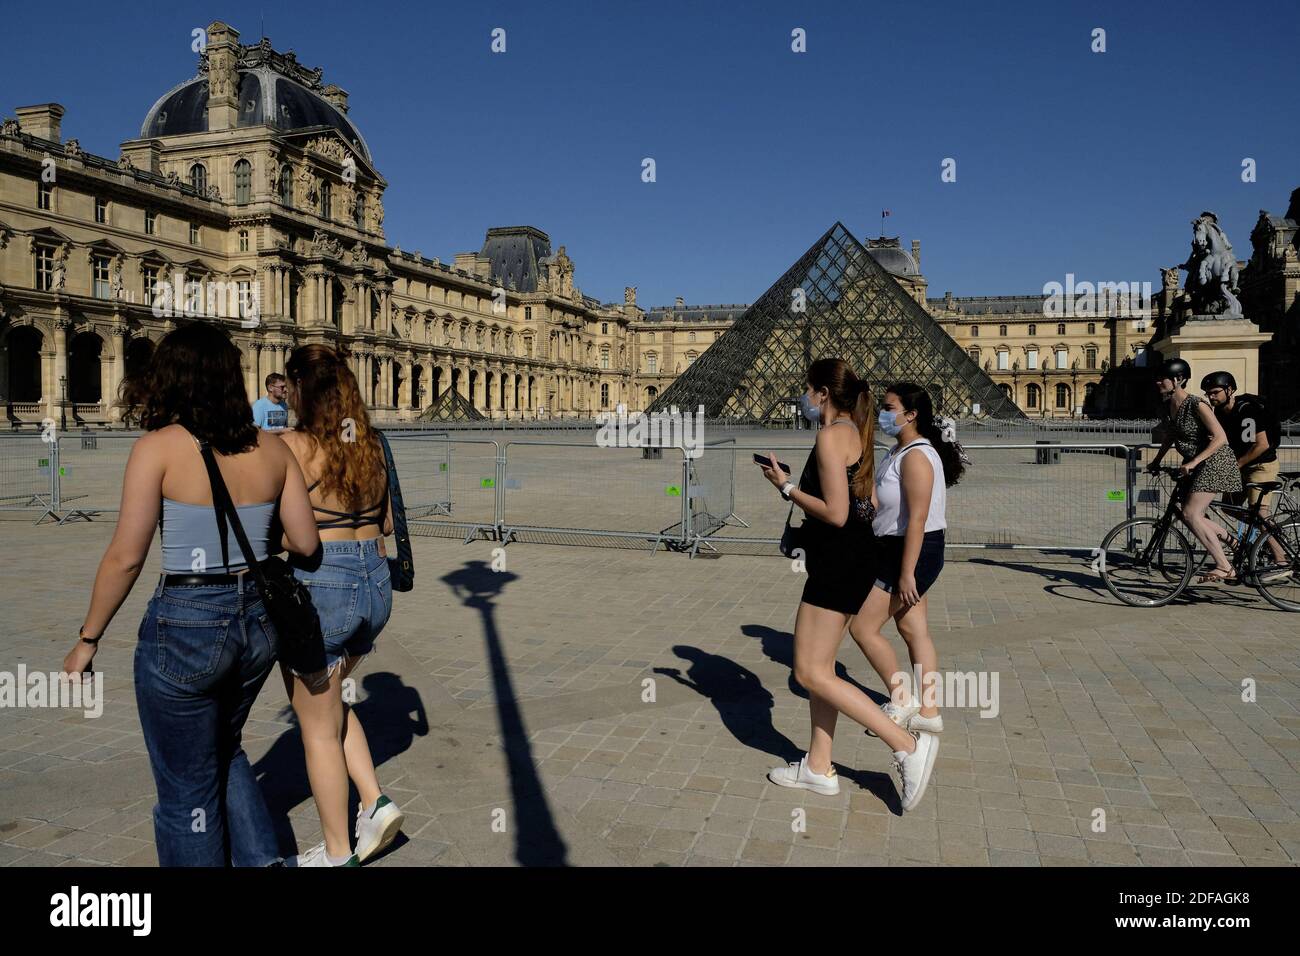 The Louvre Pyramids (Pyramides du Louvre) a large glass and metal pyramid, louvre museum (musee du louvre) is still closed as parks and gardens of Paris are reopening. on the first day of its reopening, as France eases lockdown measures taken to curb the spread of the COVID-19 (the novel coronavirus). Parks and gardens reopen on on May 30, 2020 in France, cafes and restaurants are preparing to welcome their first customers on June 2, since mid-March: a scent of rediscovered freedom floats in the air, despite still limited travel and a grim economic landscape. Paris, France on May 30, 2020. Pho Stock Photo